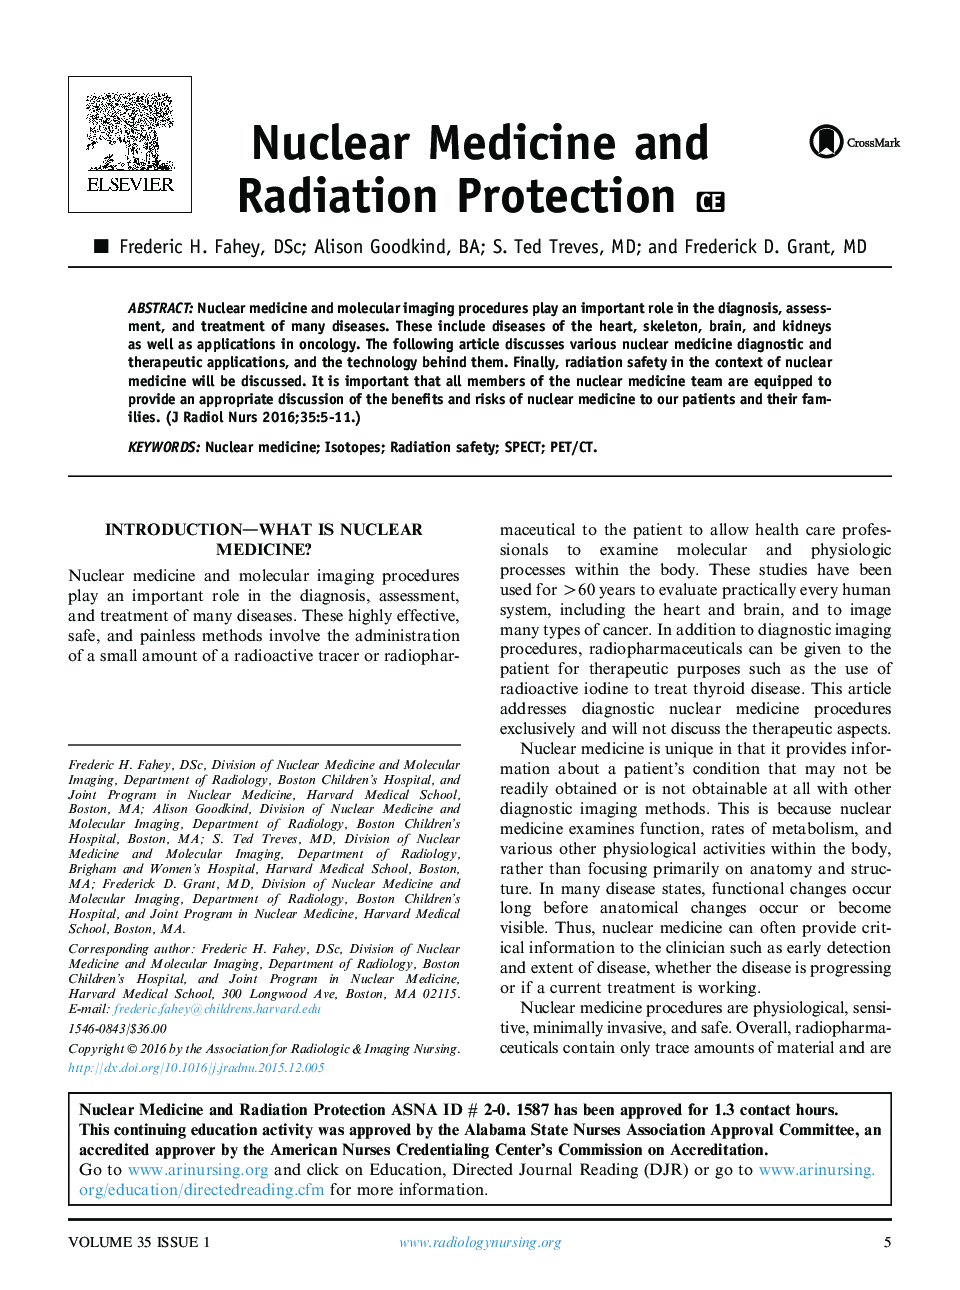 Nuclear Medicine and Radiation Protection